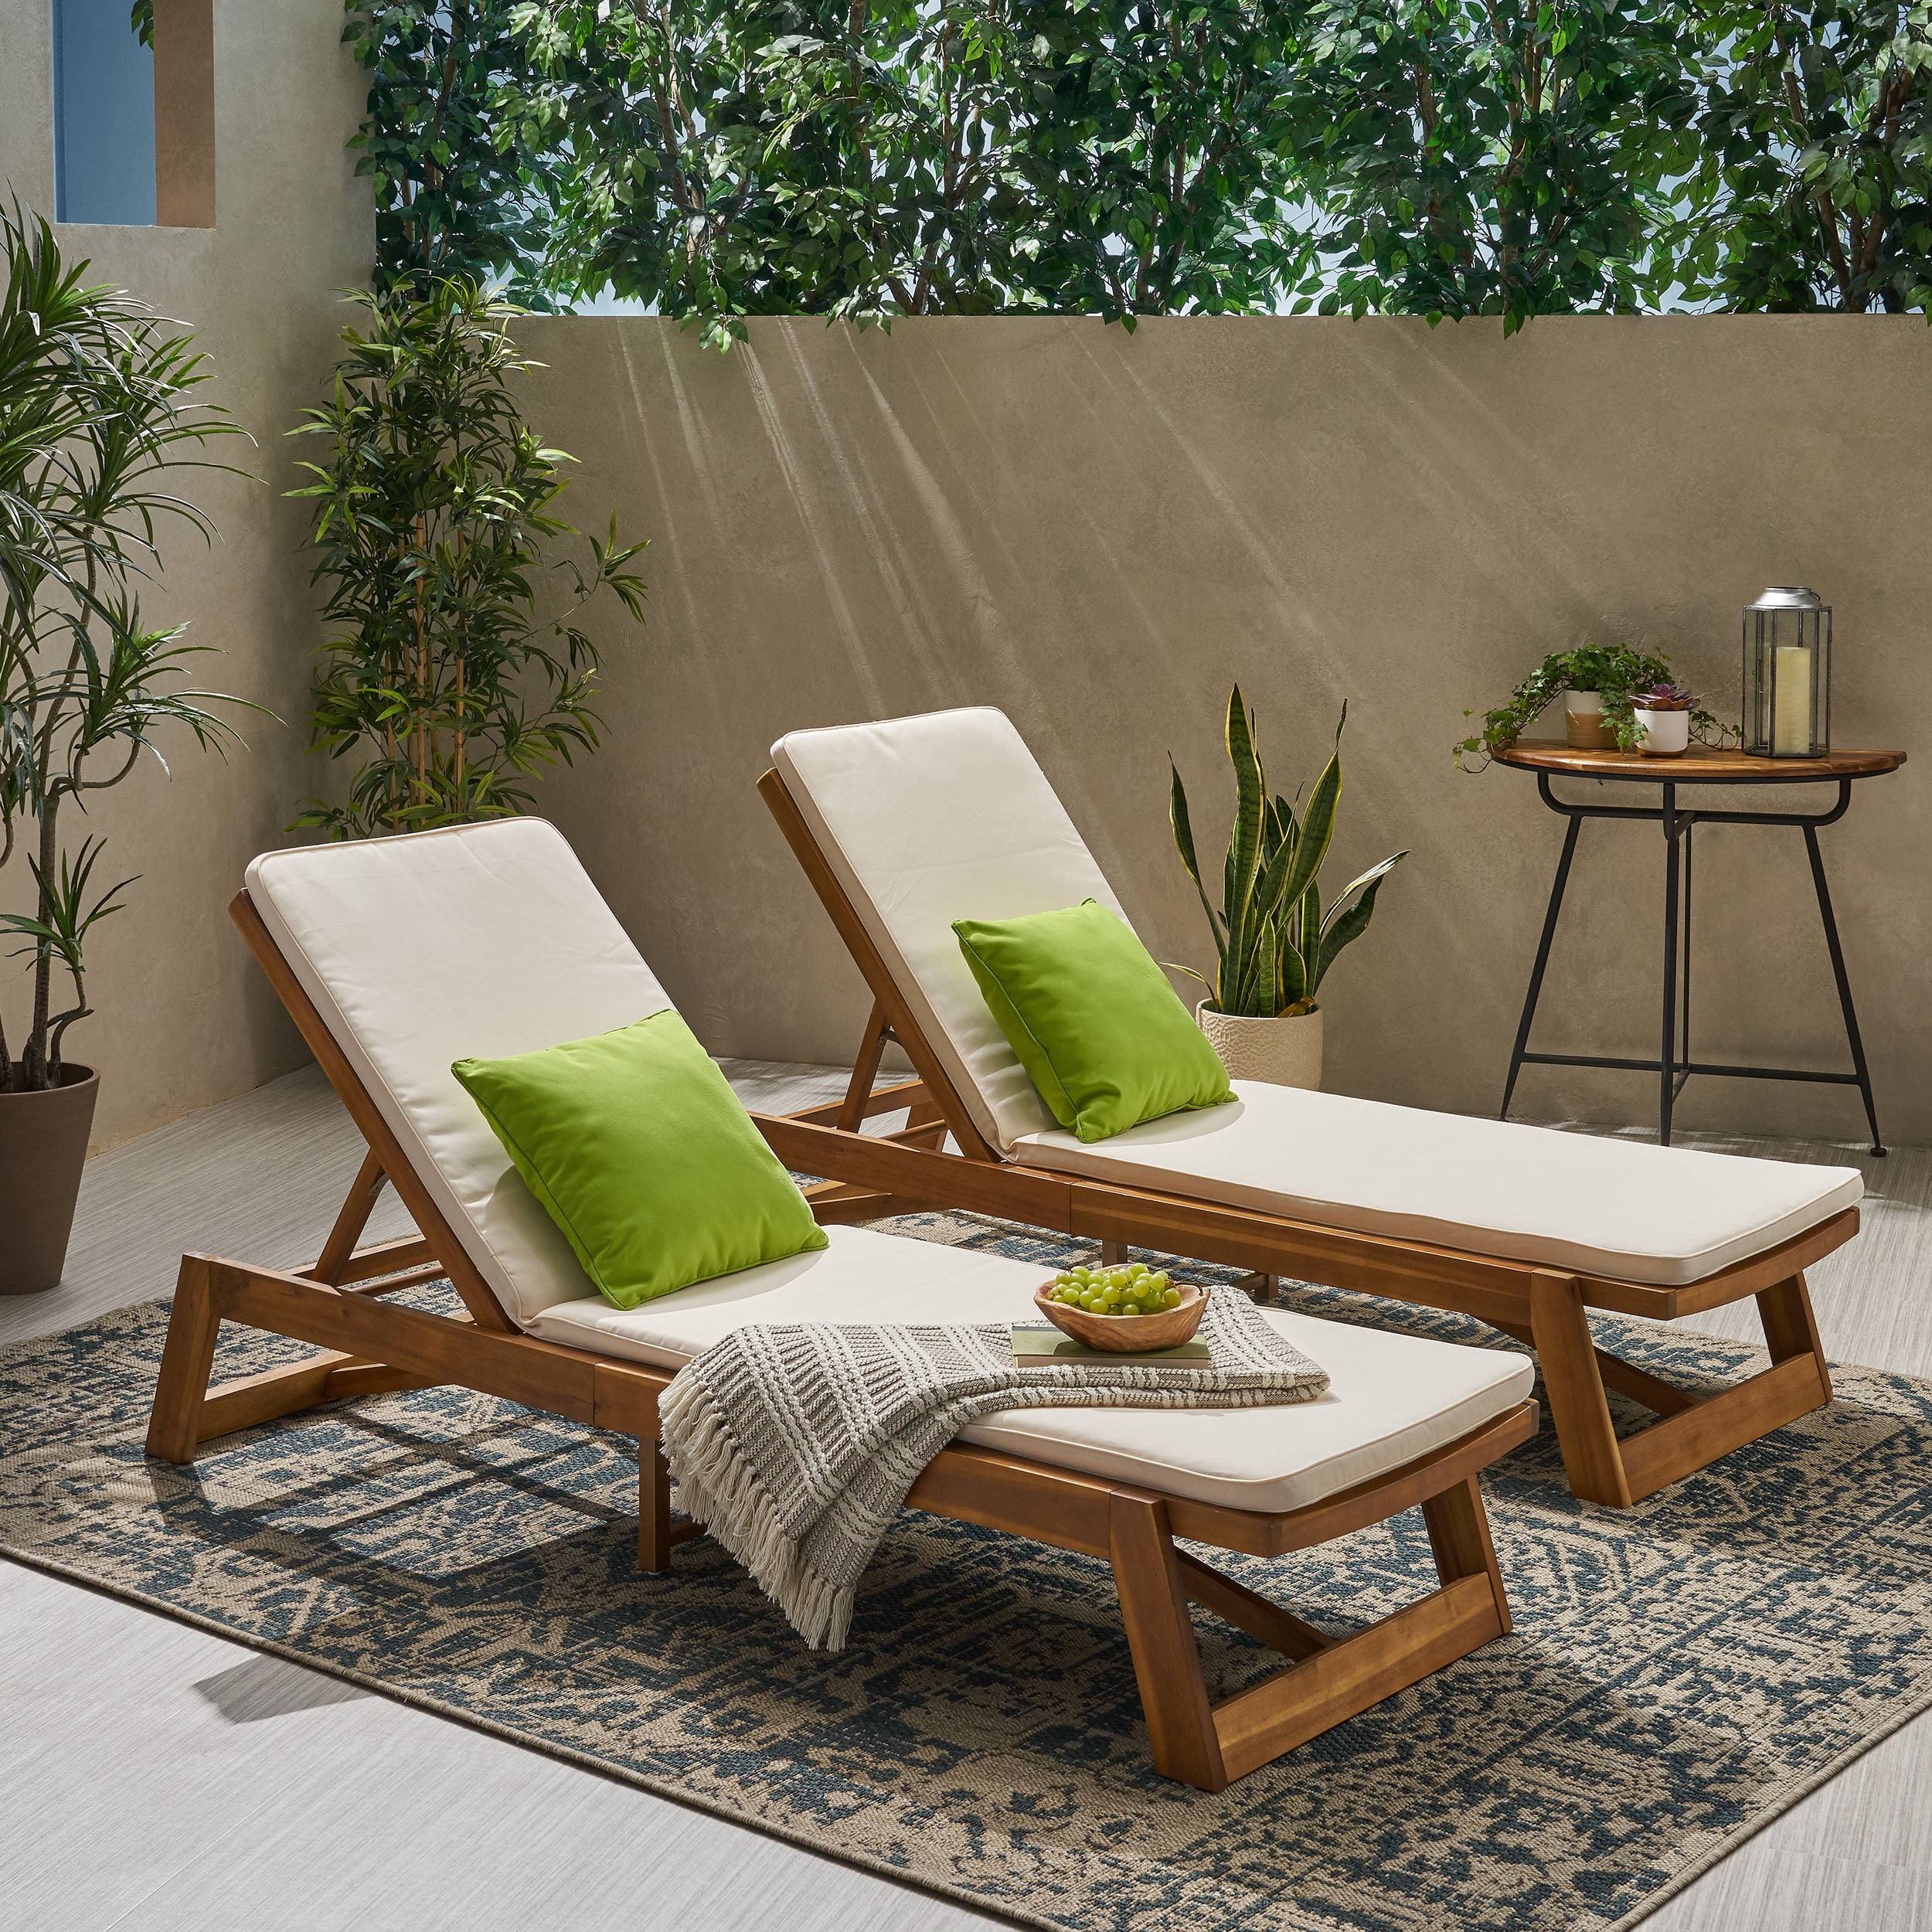 Stylish Patio Conversation Sets For Outdoor Lounging